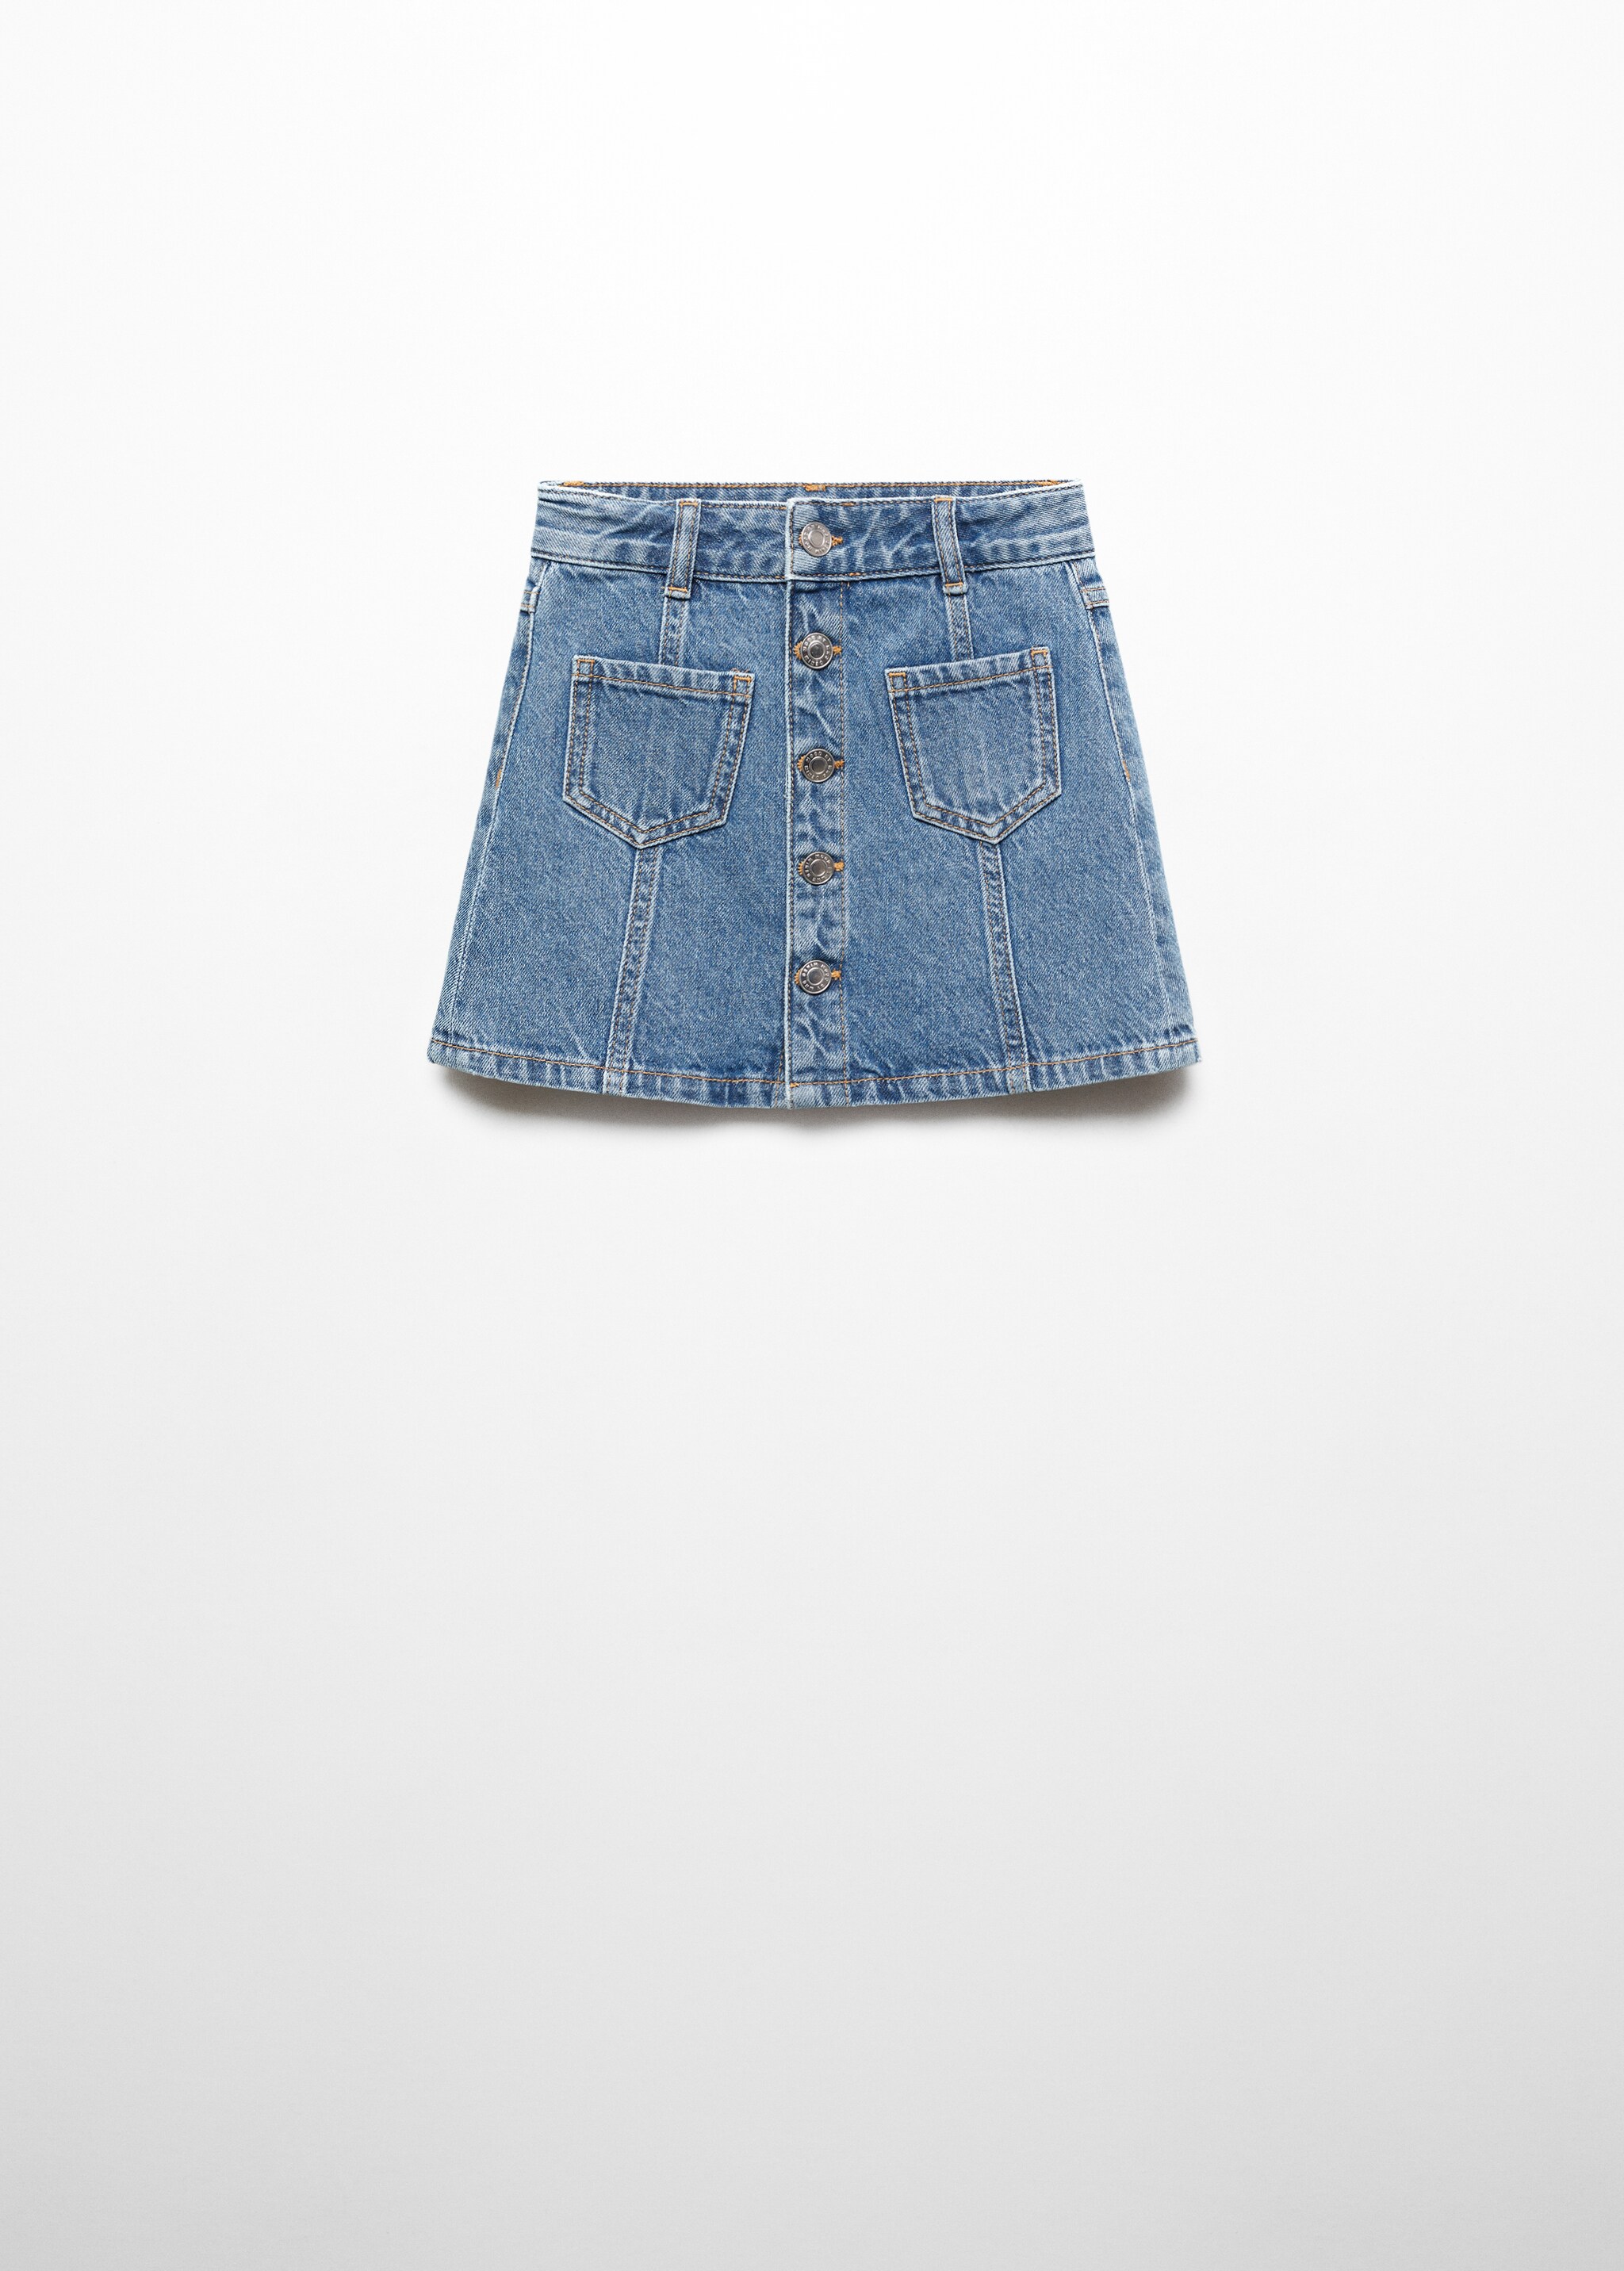 Buttoned denim skirt - Article without model